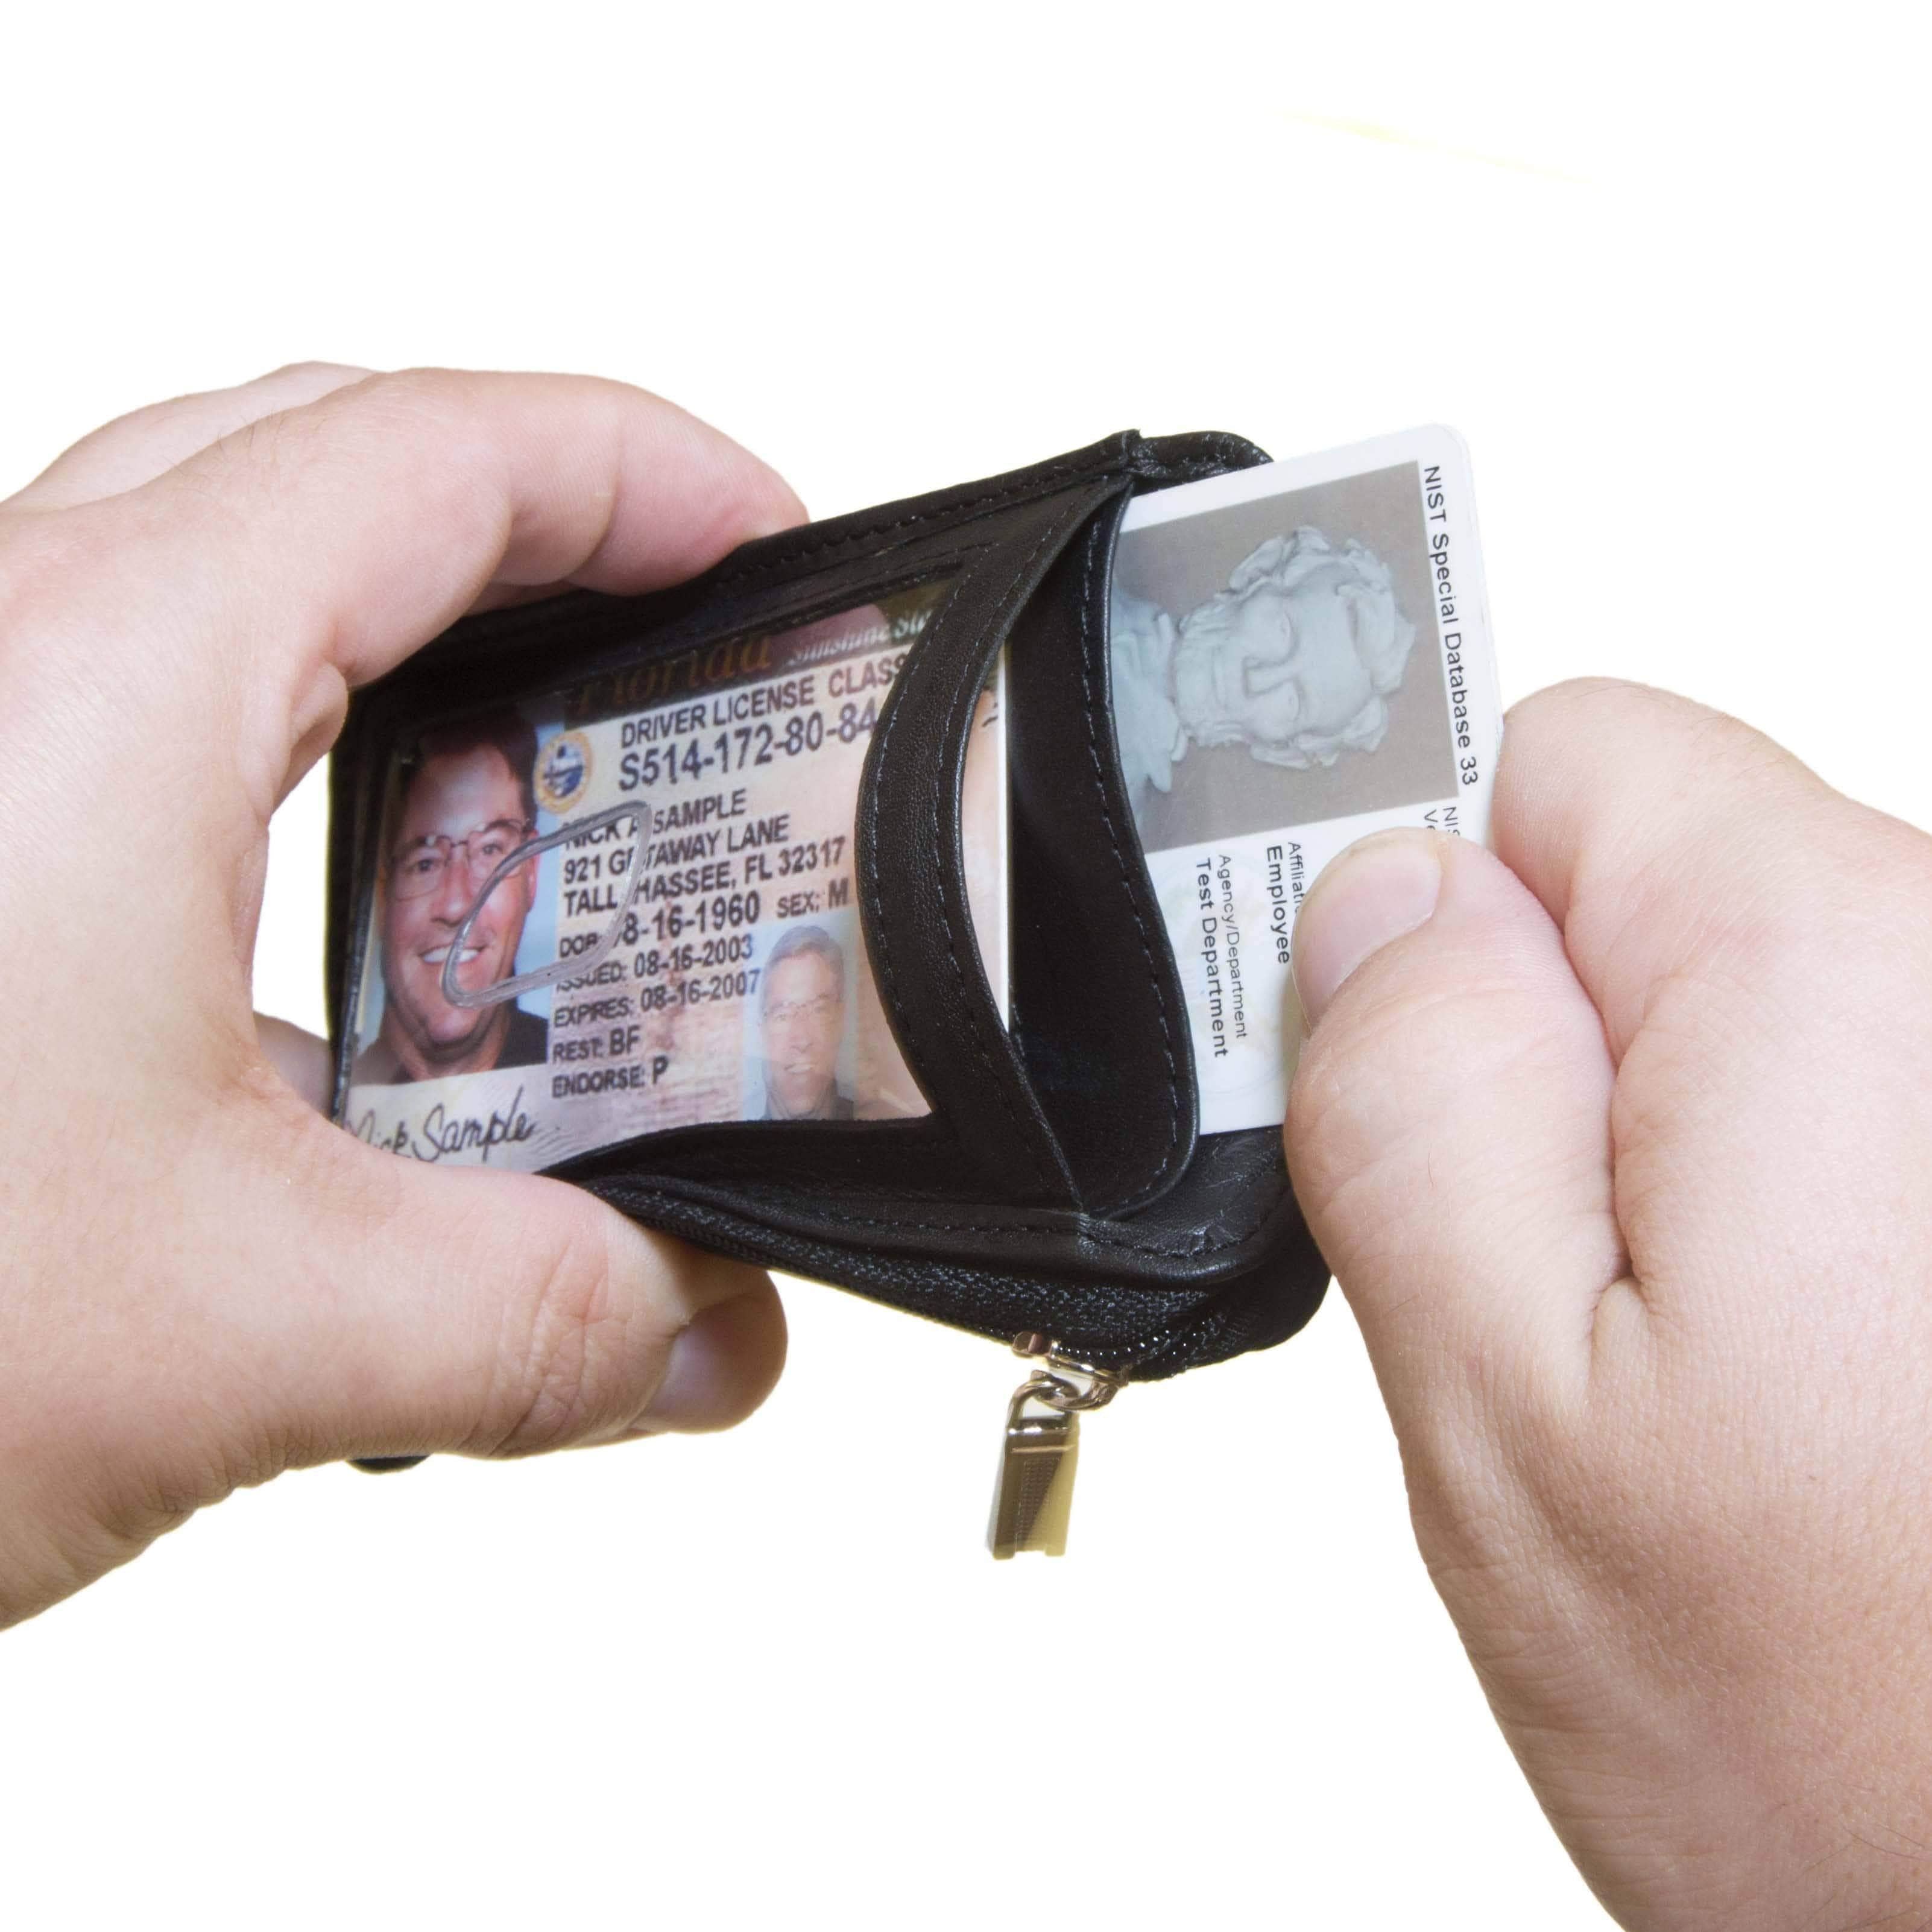 Driver's License – MA - Hand Prop Room